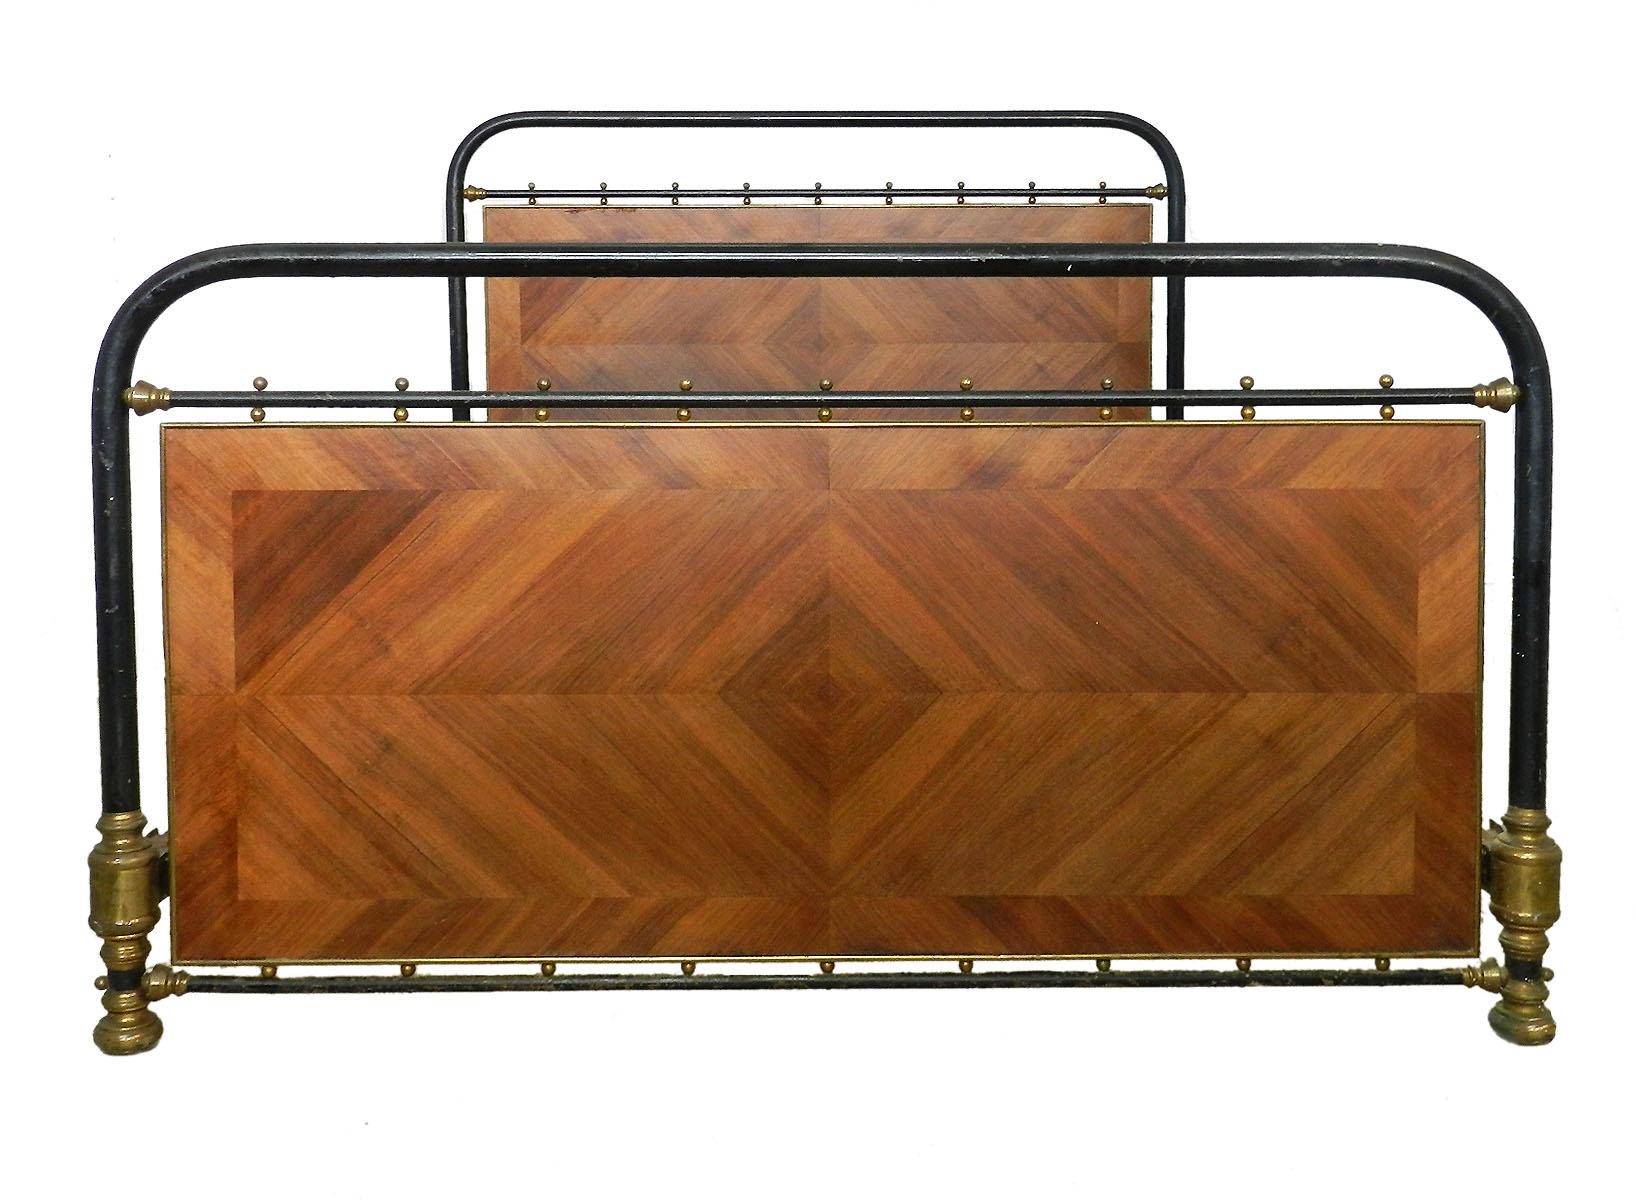 French bed circa 1910 US Queen or UK King size
Brass and iron with wood quartered panels
This bed will take a standard US Queen or UK king size mattress on either wooden slats or box base (not included)
Footboard measures: height 88 cms, 34.6